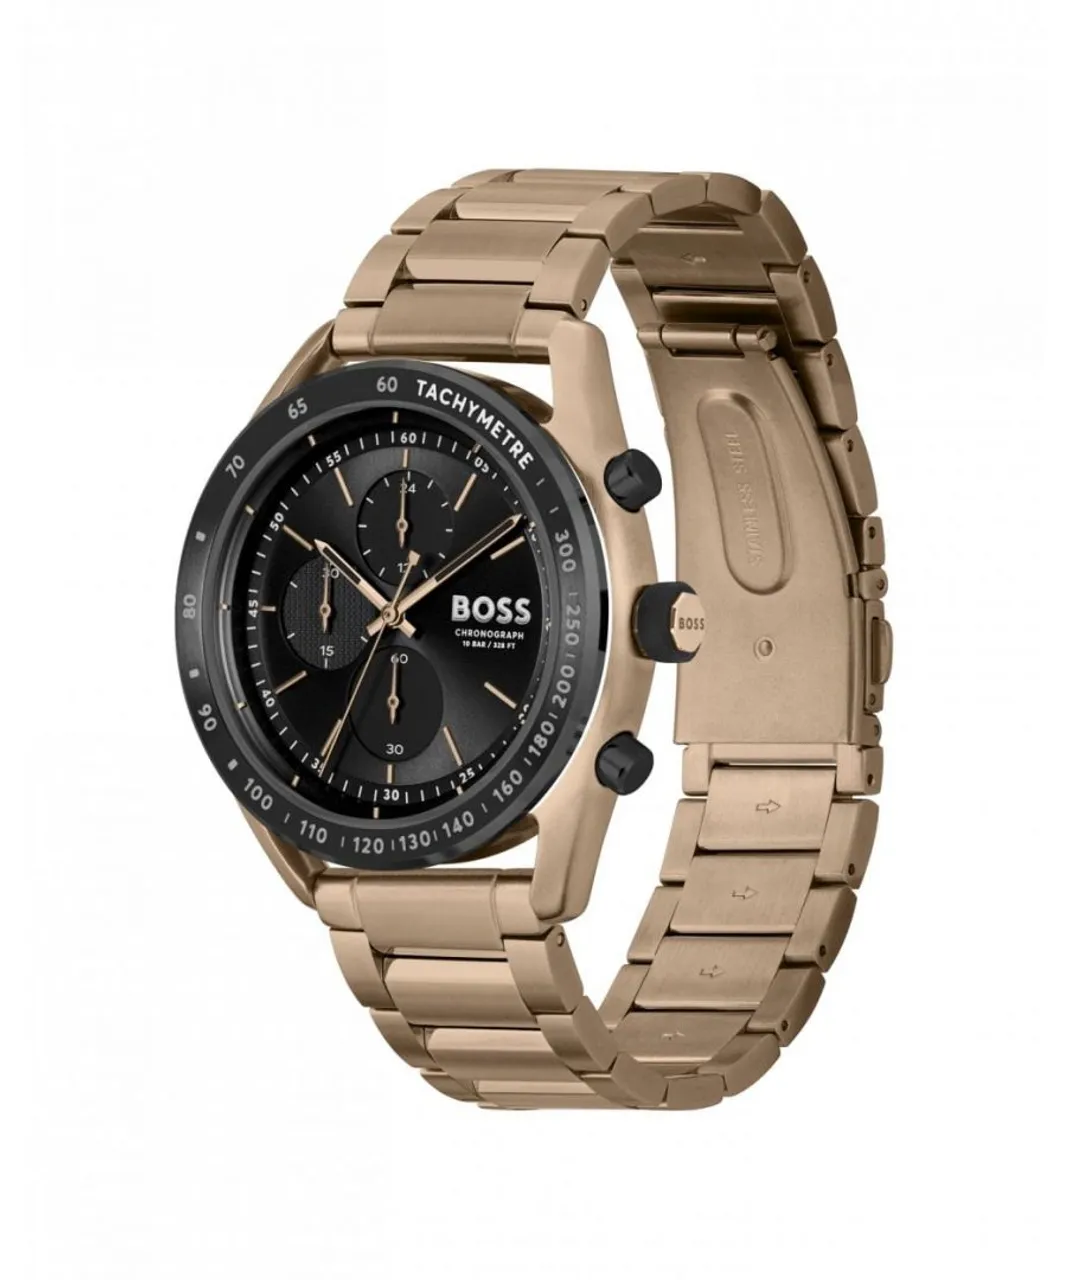 Boss Center Court Gold Mens Stainless Steel Strap Watch - Black/Gold - One Size